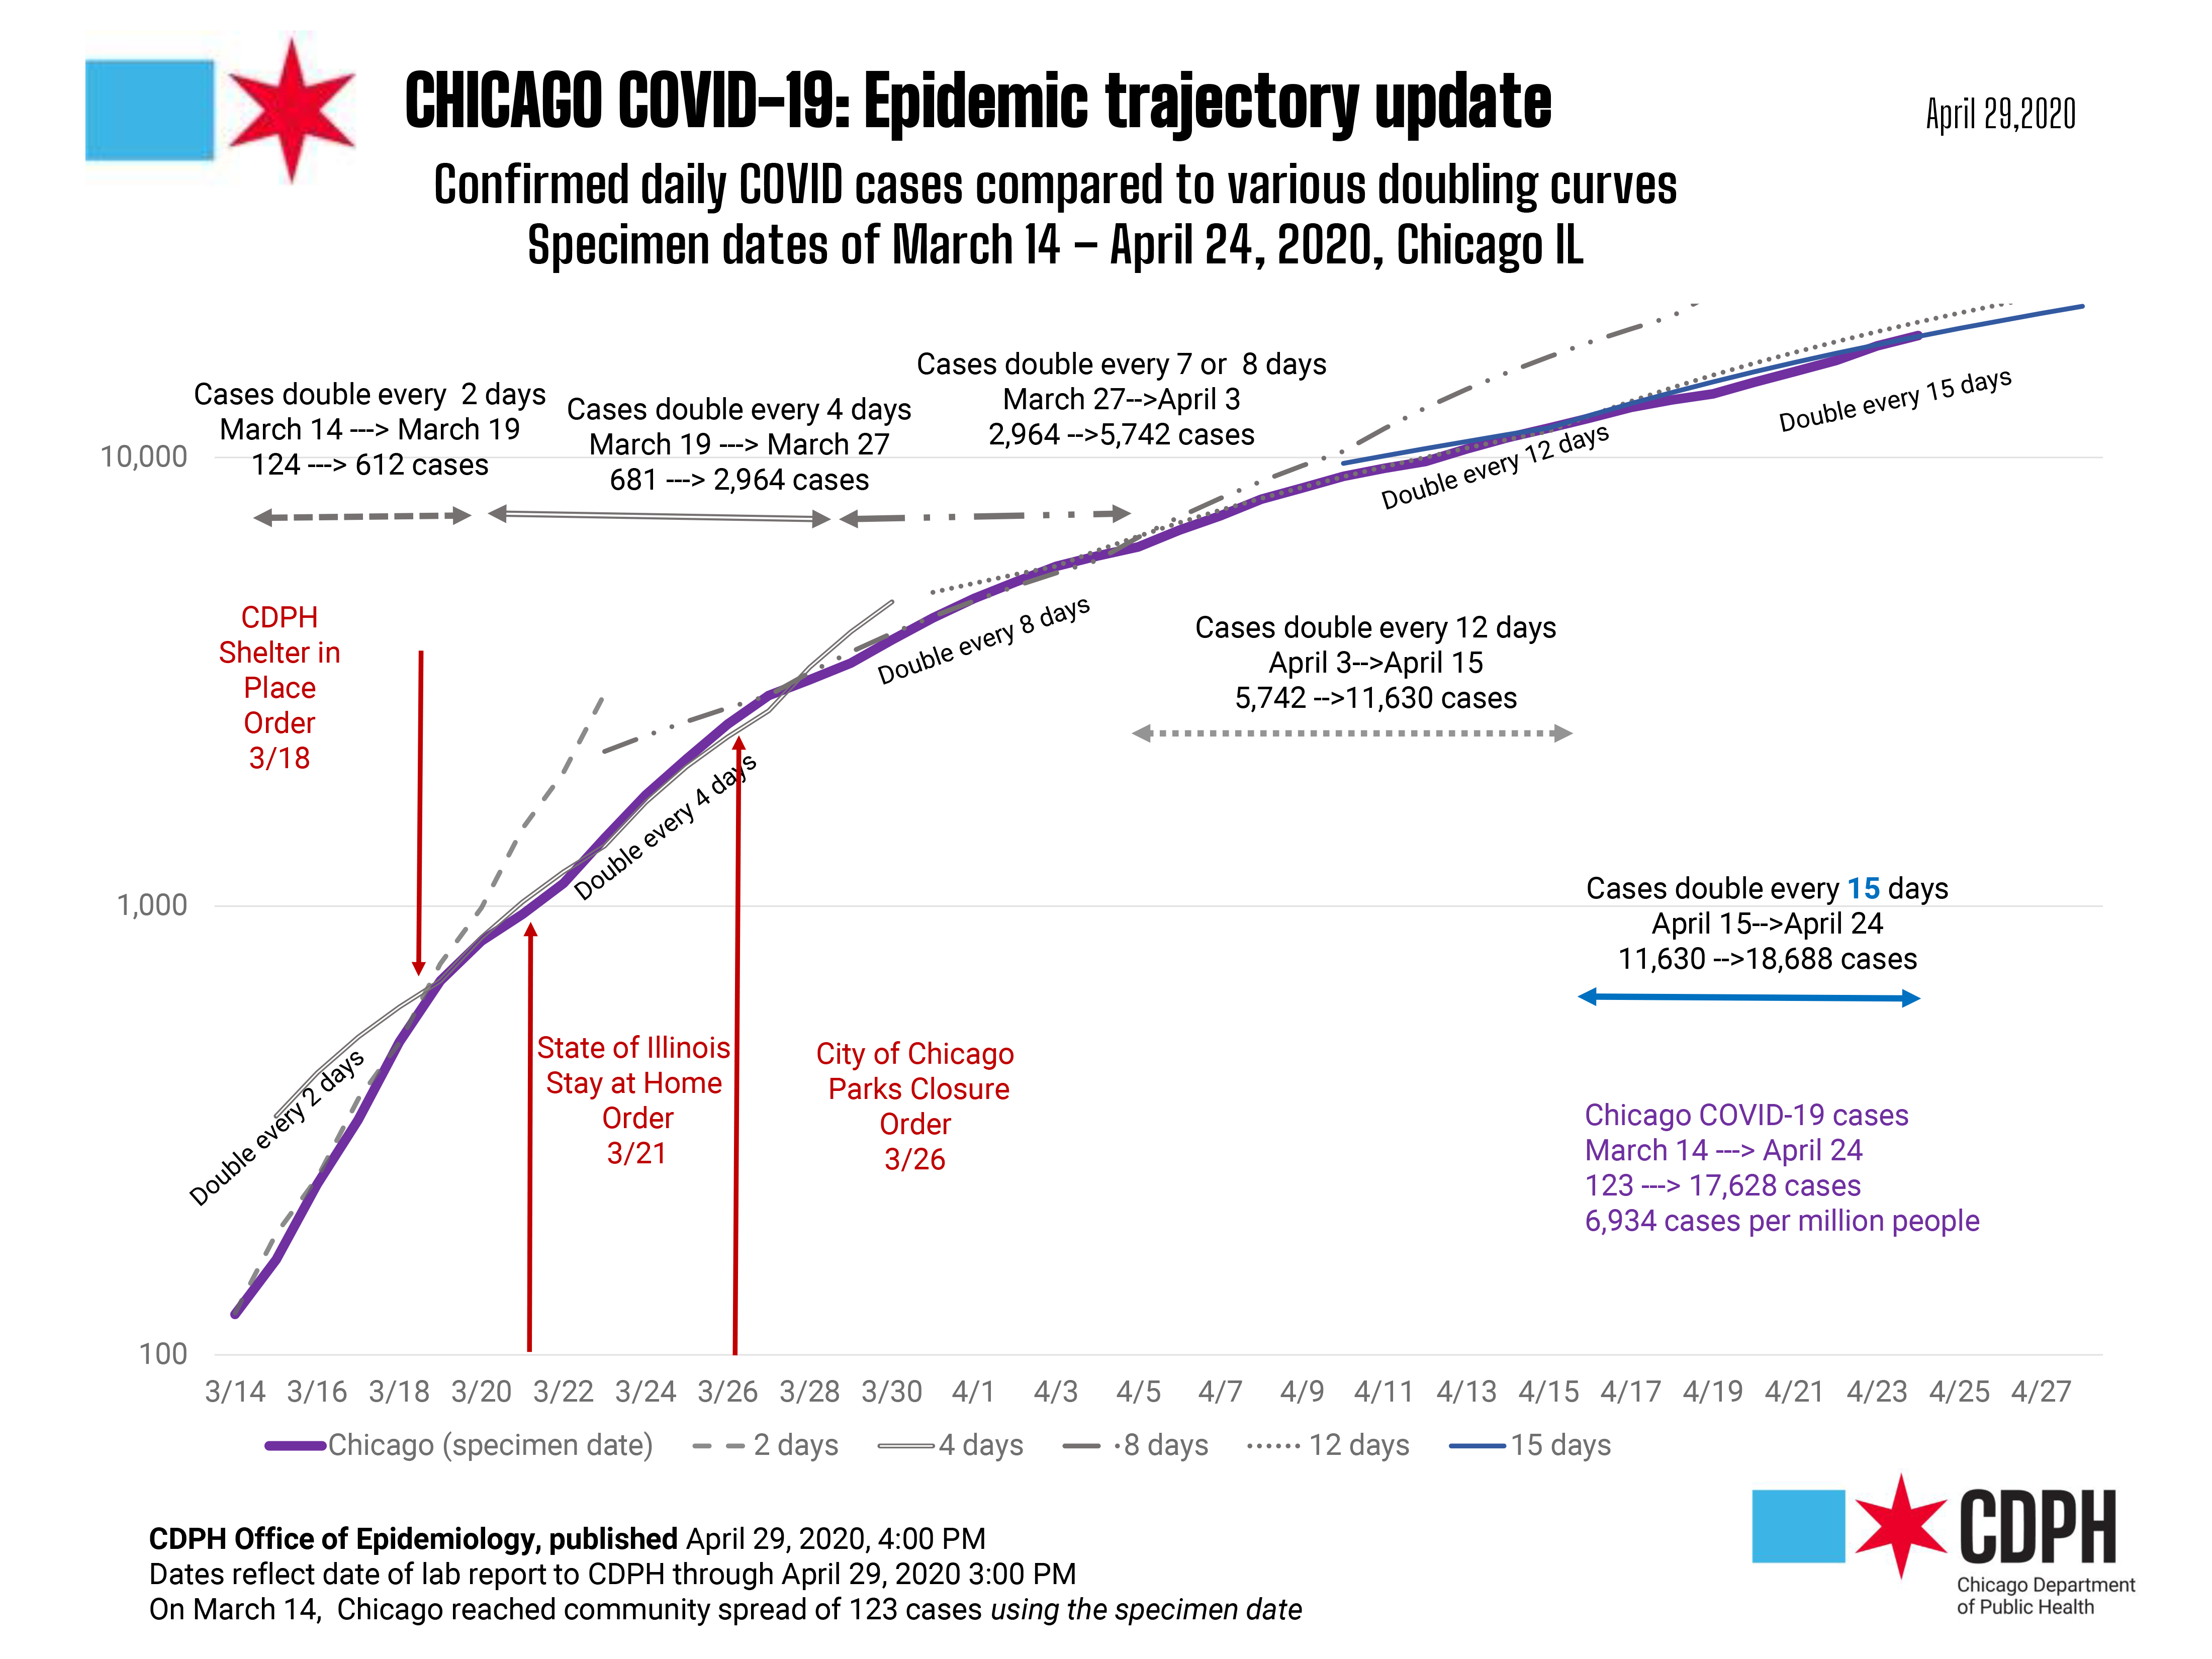 Chicago COVID Epidemic Trajectory Update